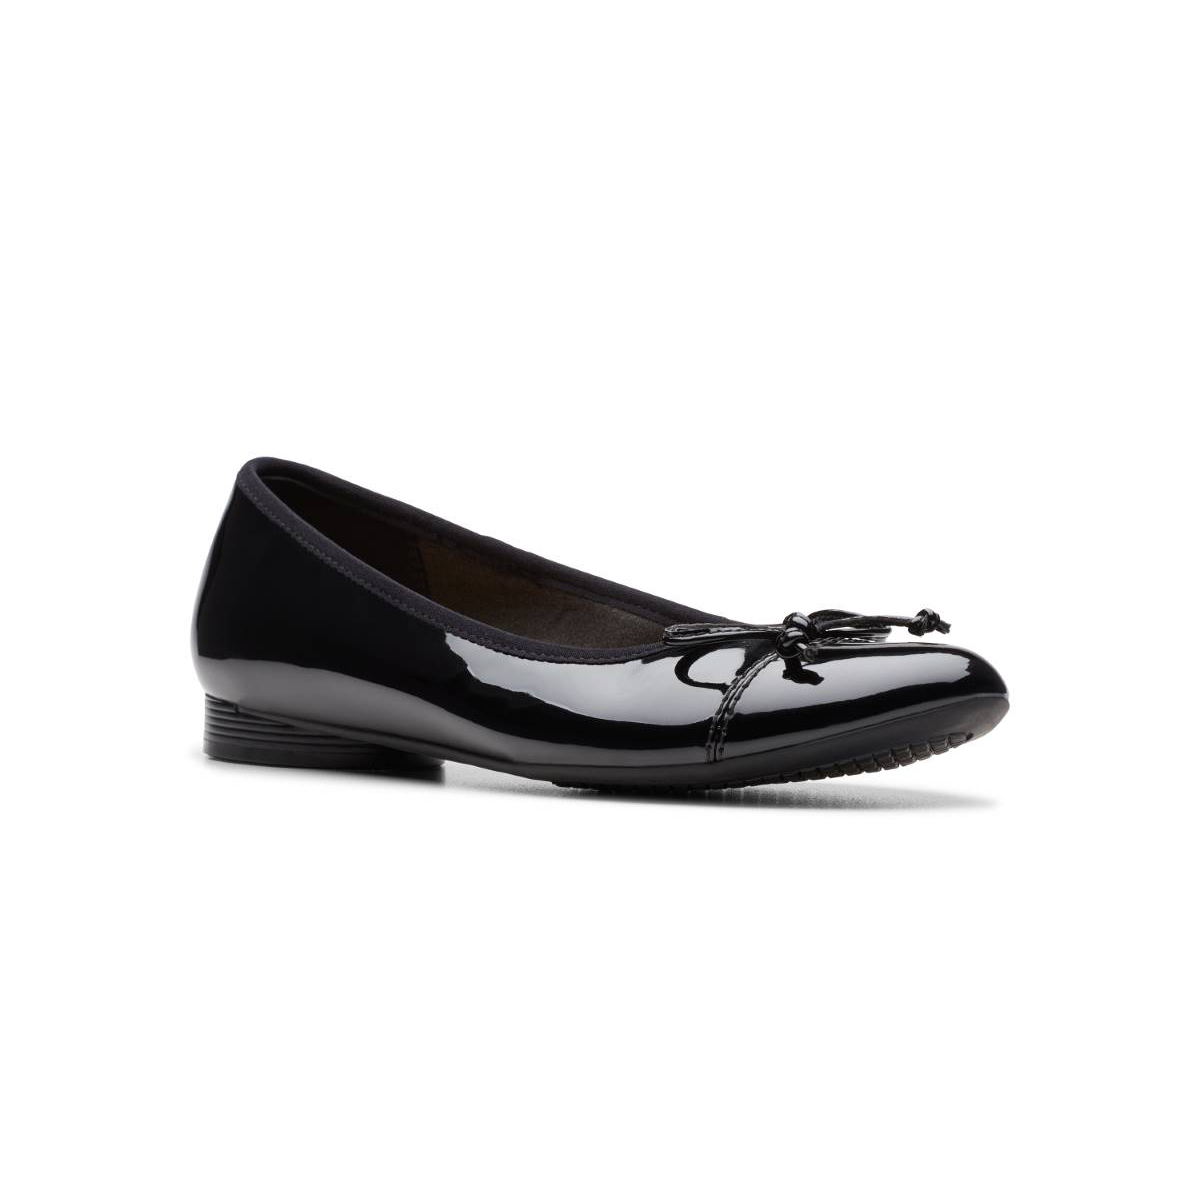 Clarks Loreleigh Rae Black patent Womens pumps 7735-54D in a Plain Leather in Size 4